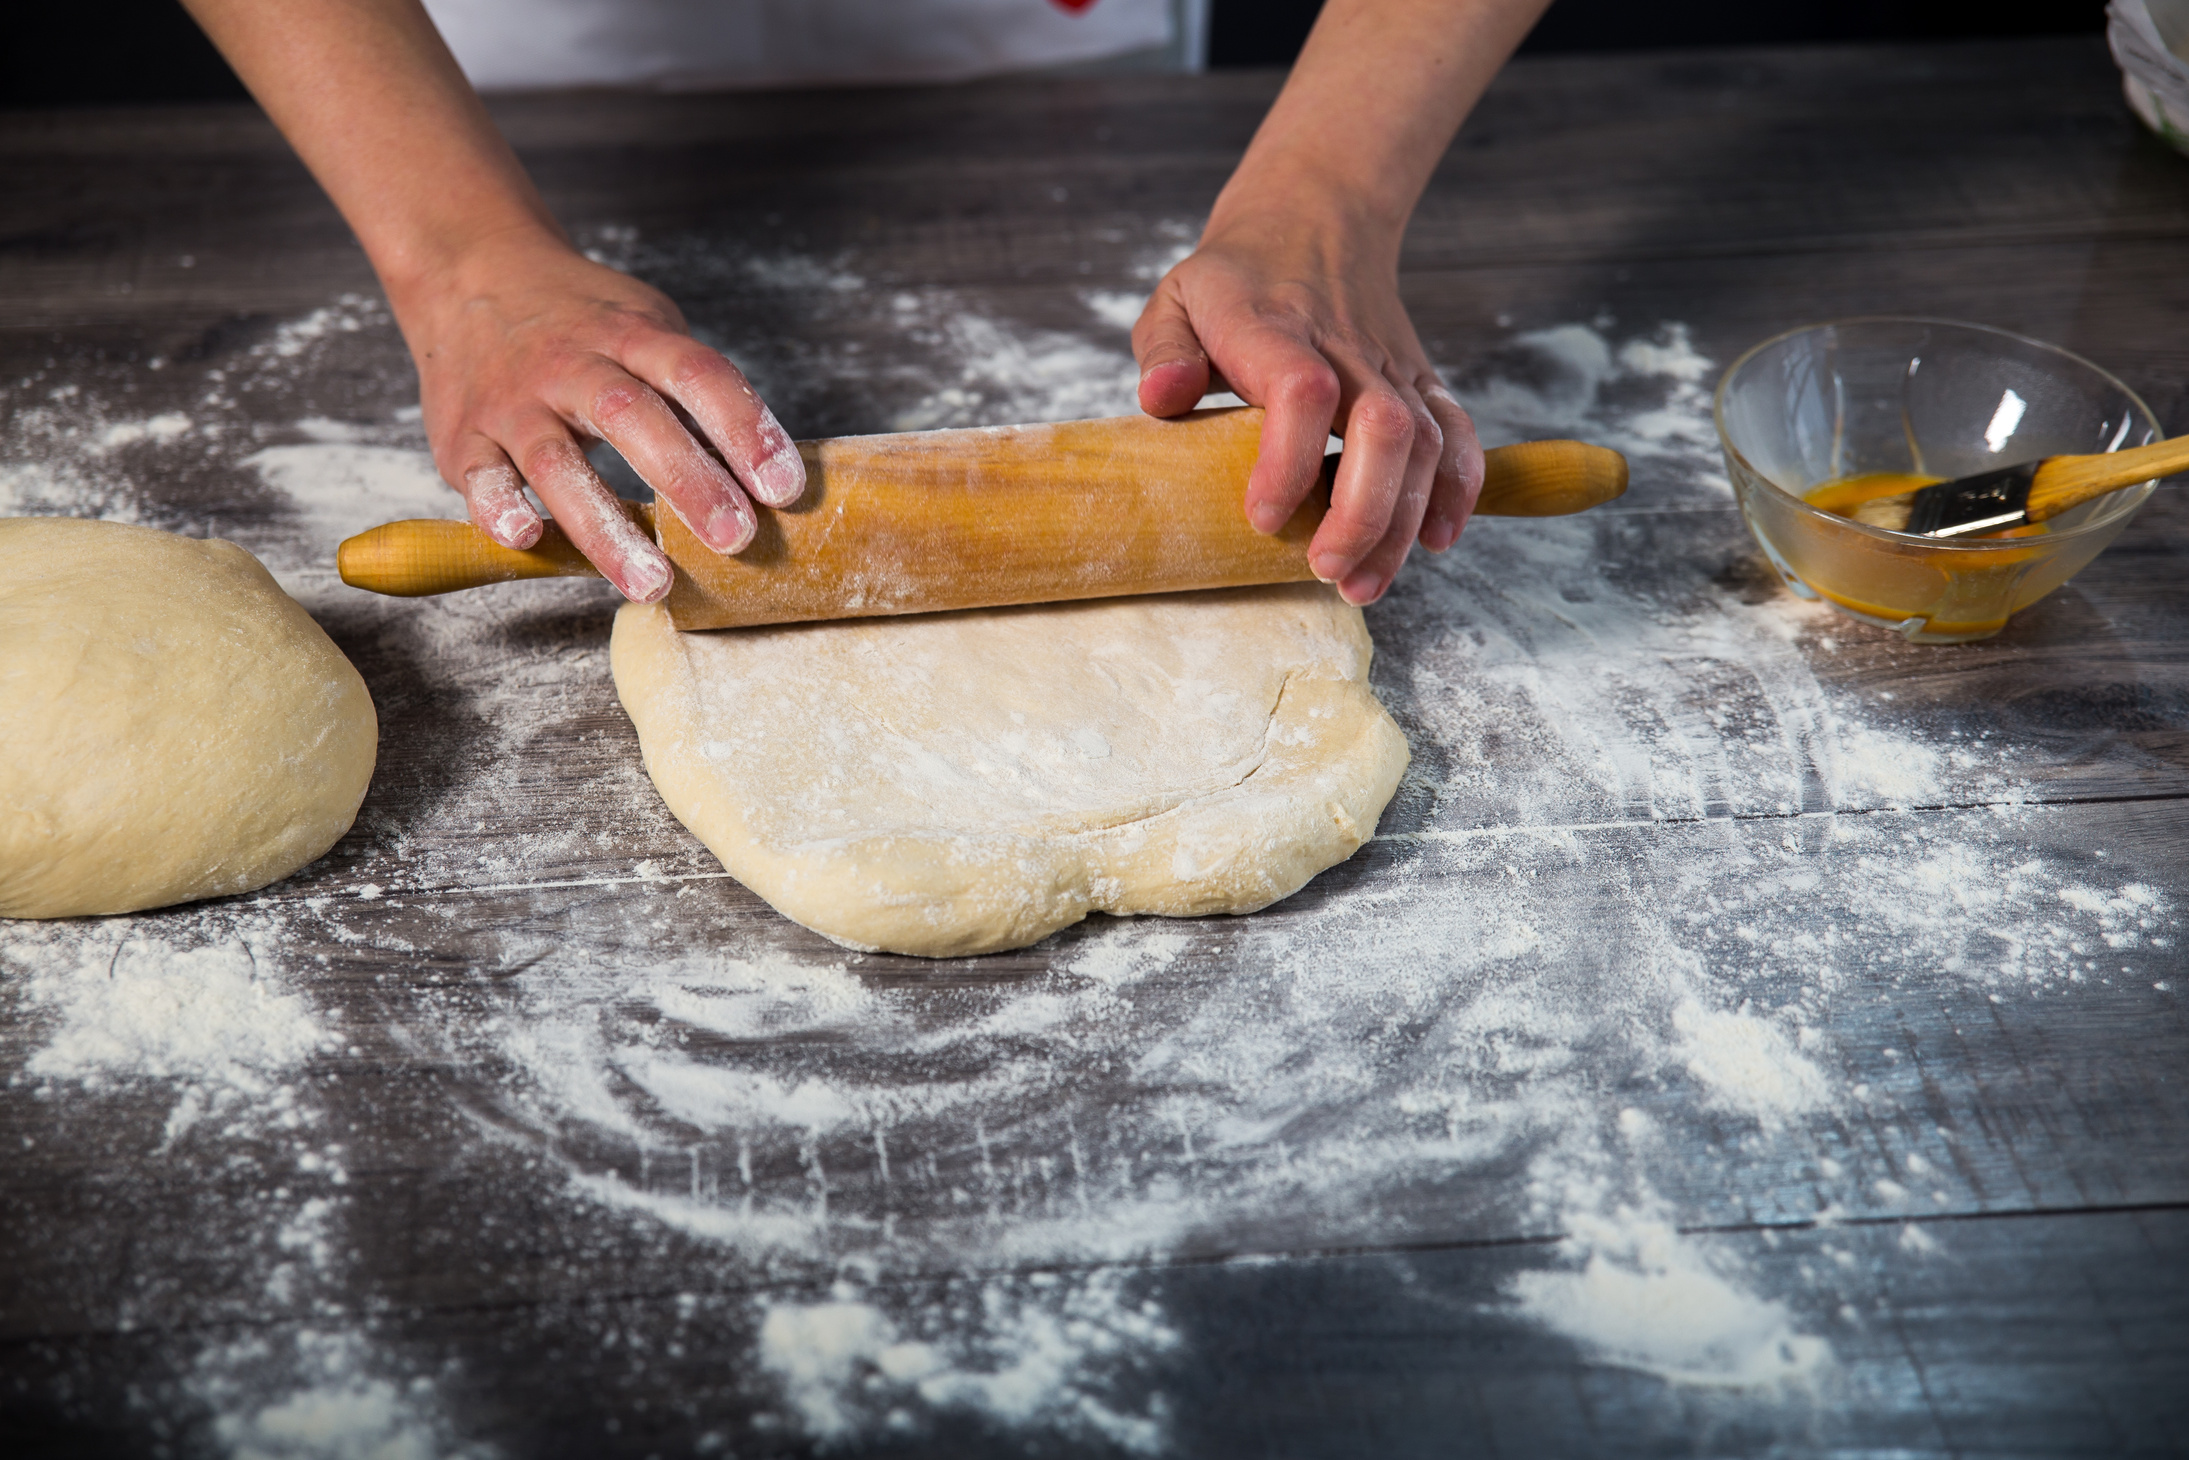 Hands baking dough with rolling pin